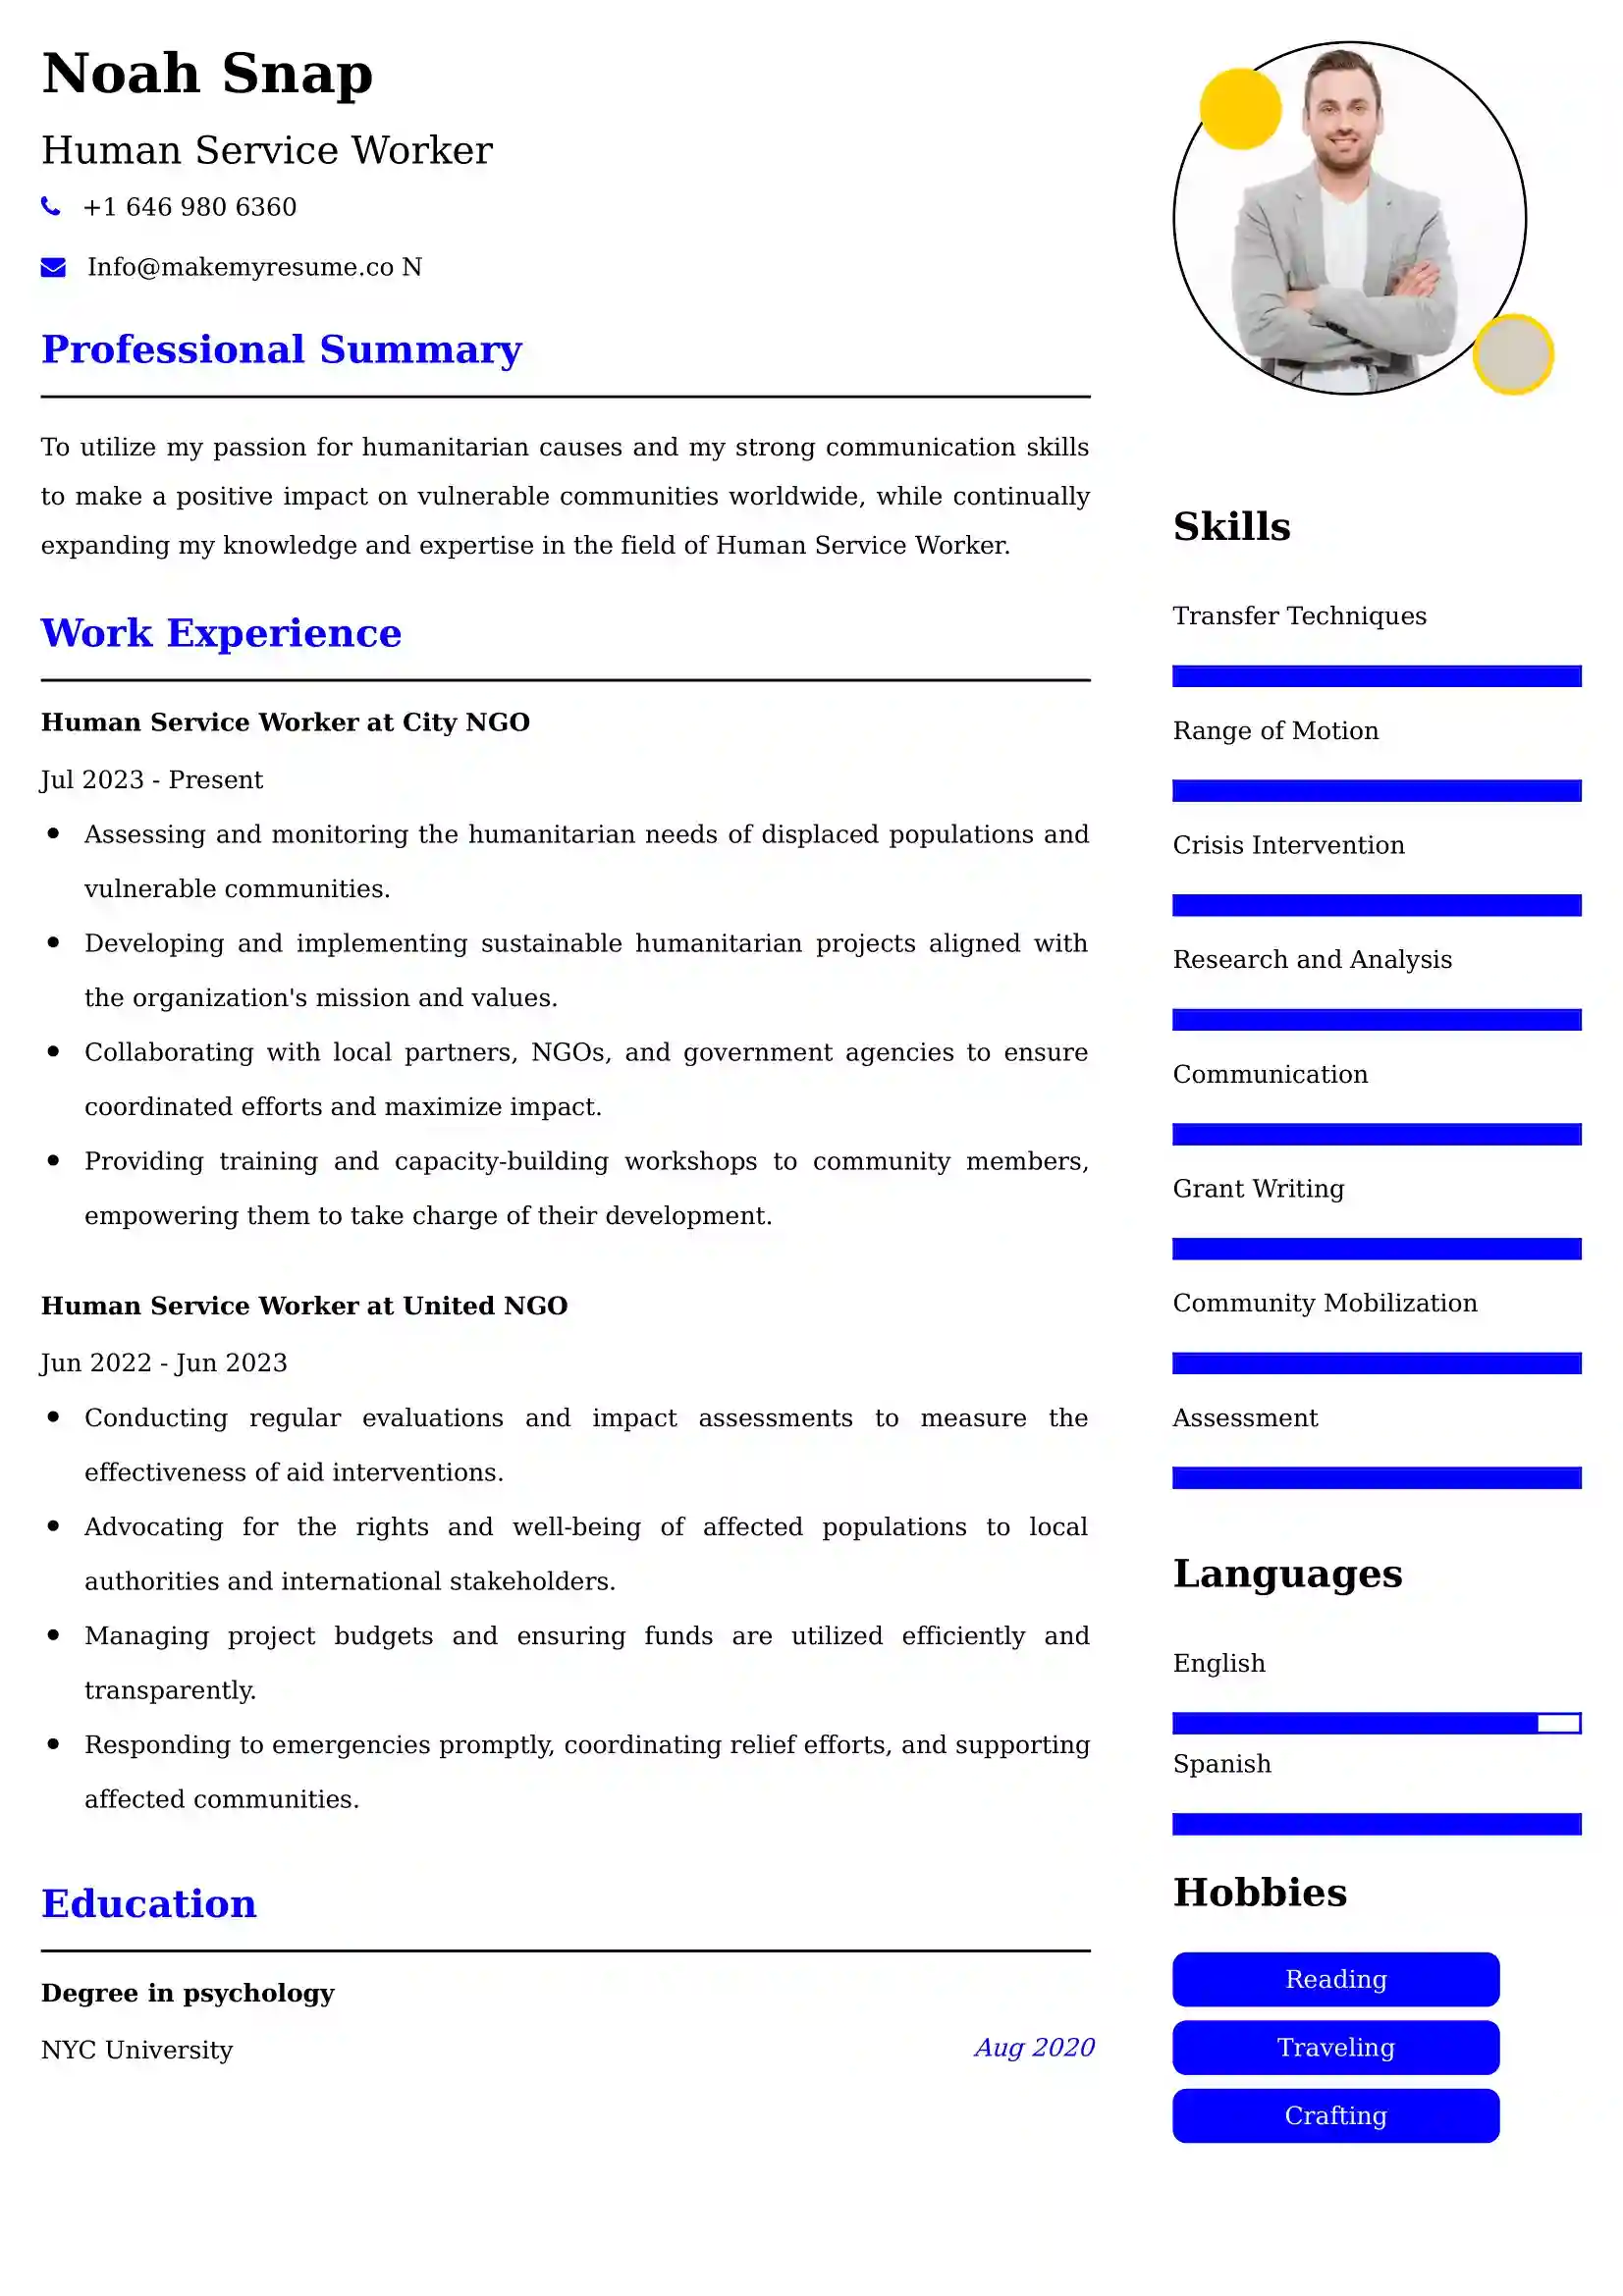 Human Service Worker Resume Examples for UAE